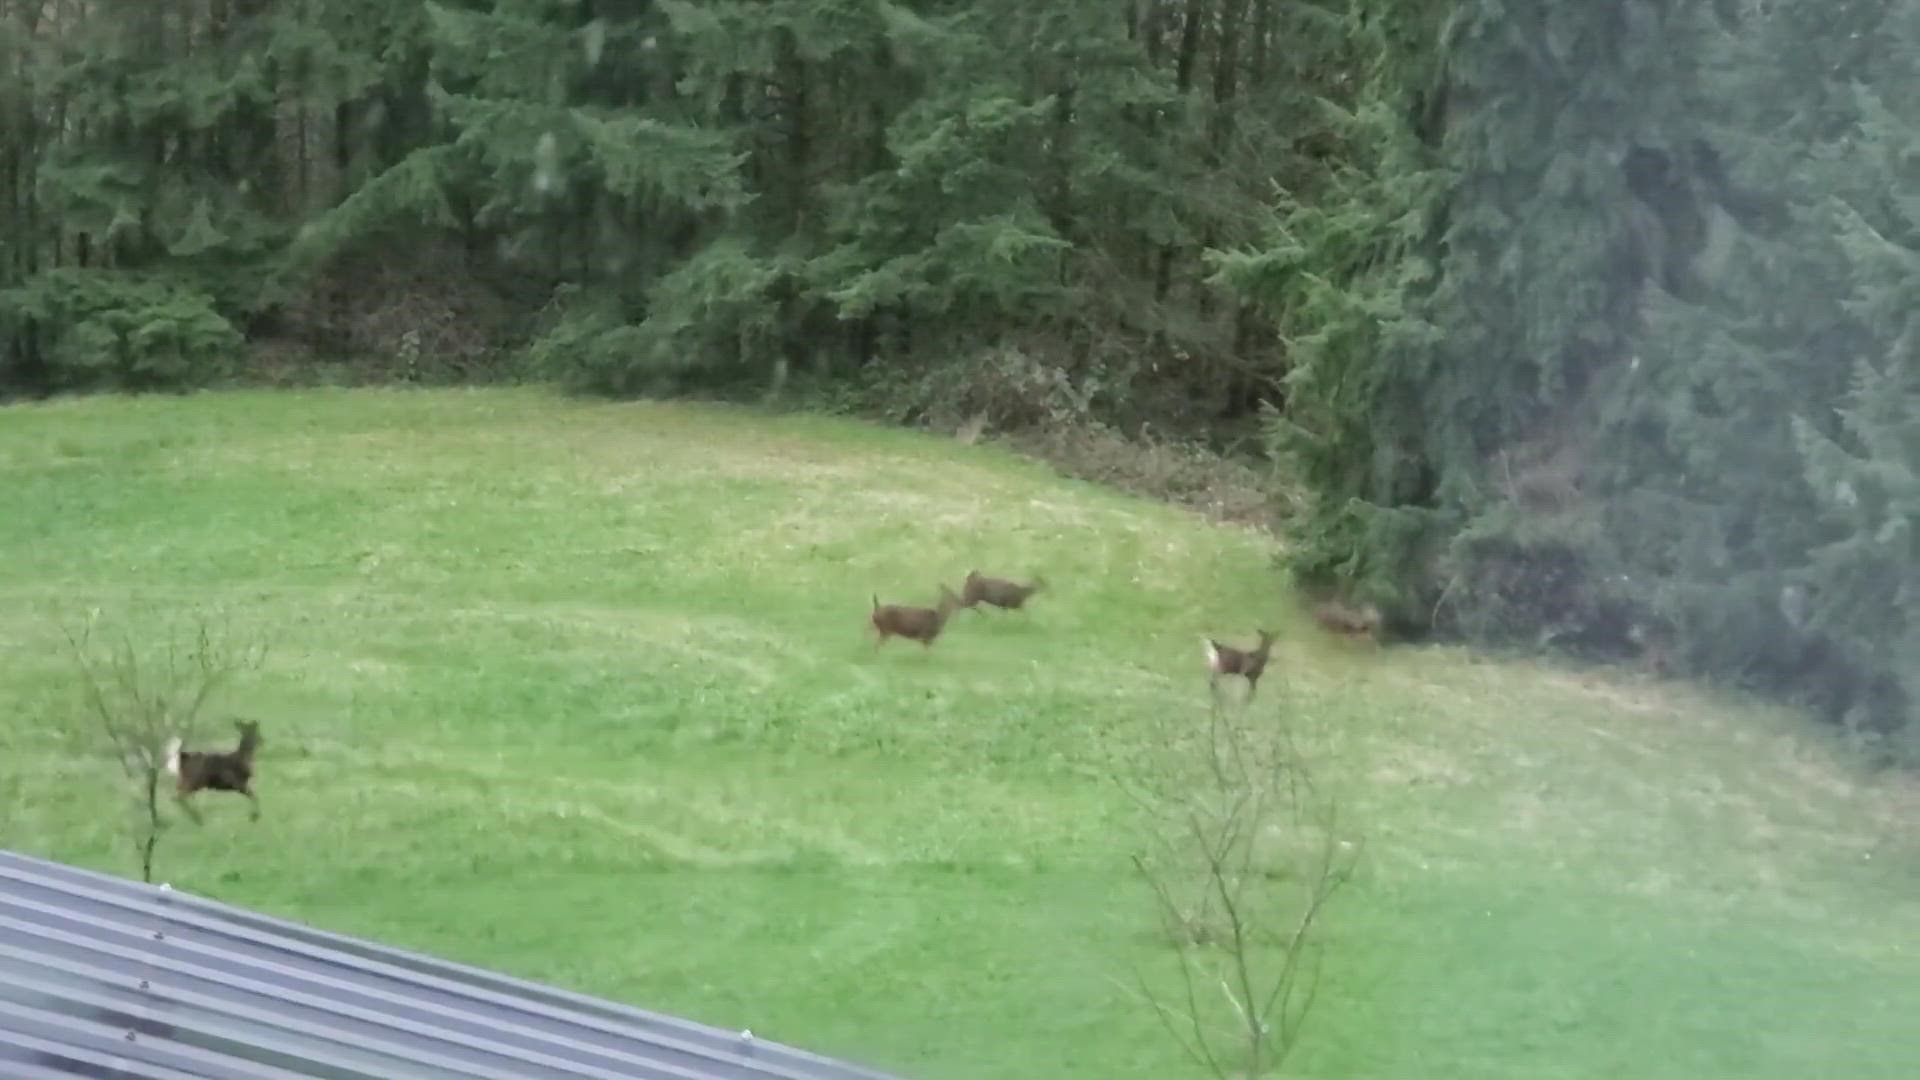 These blackltail deer are enjoying the third dry weekend in a row.
Credit: Petri Saastamo